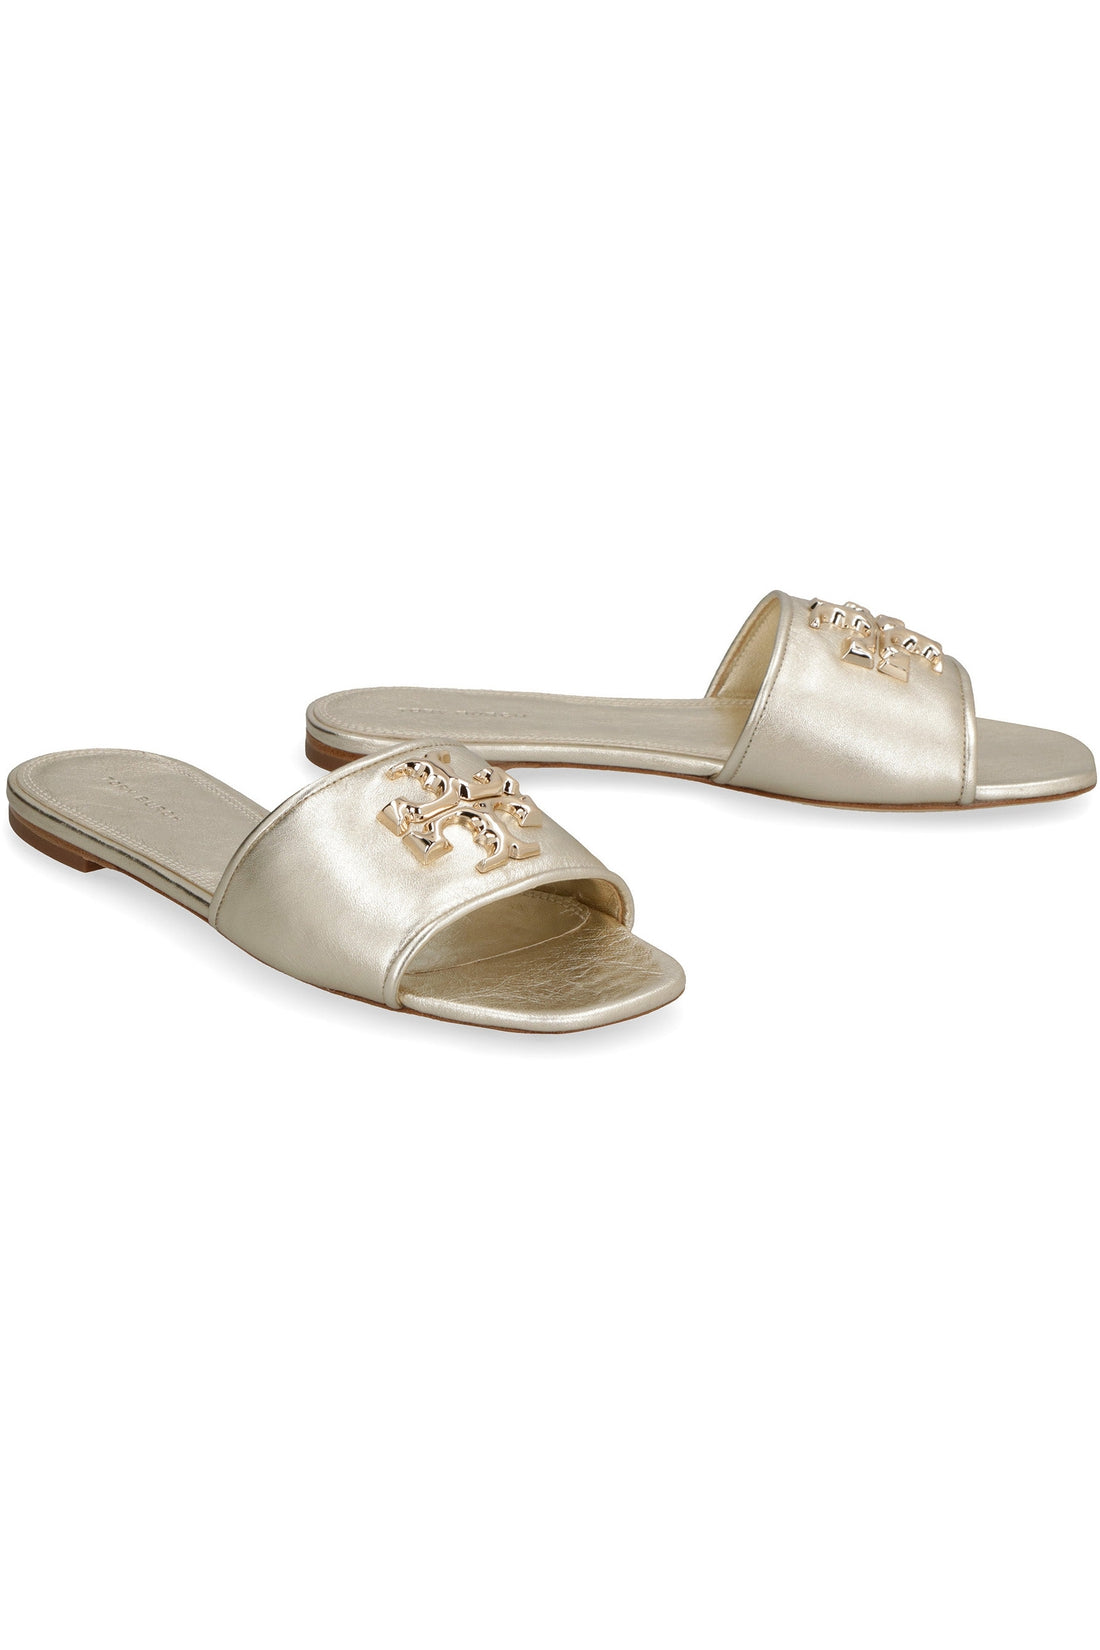 Tory Burch-OUTLET-SALE-Eleanor leather slides with logo-ARCHIVIST